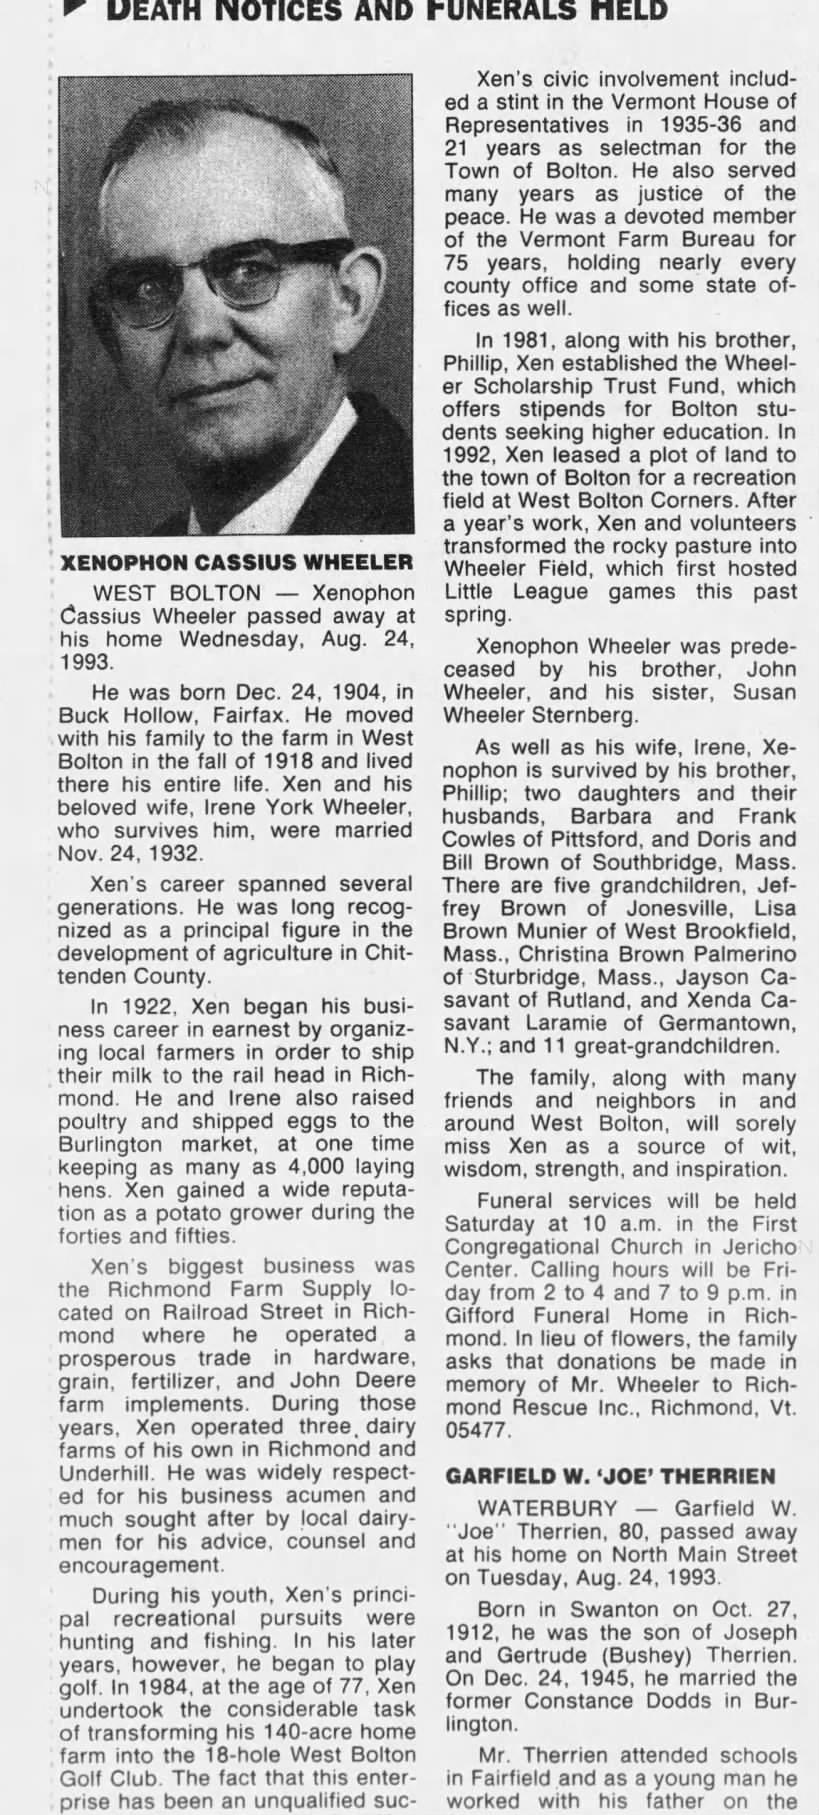 Obituary for XENOPHON CASSIUS WHEELER, 1904-1993 (Aged 80)